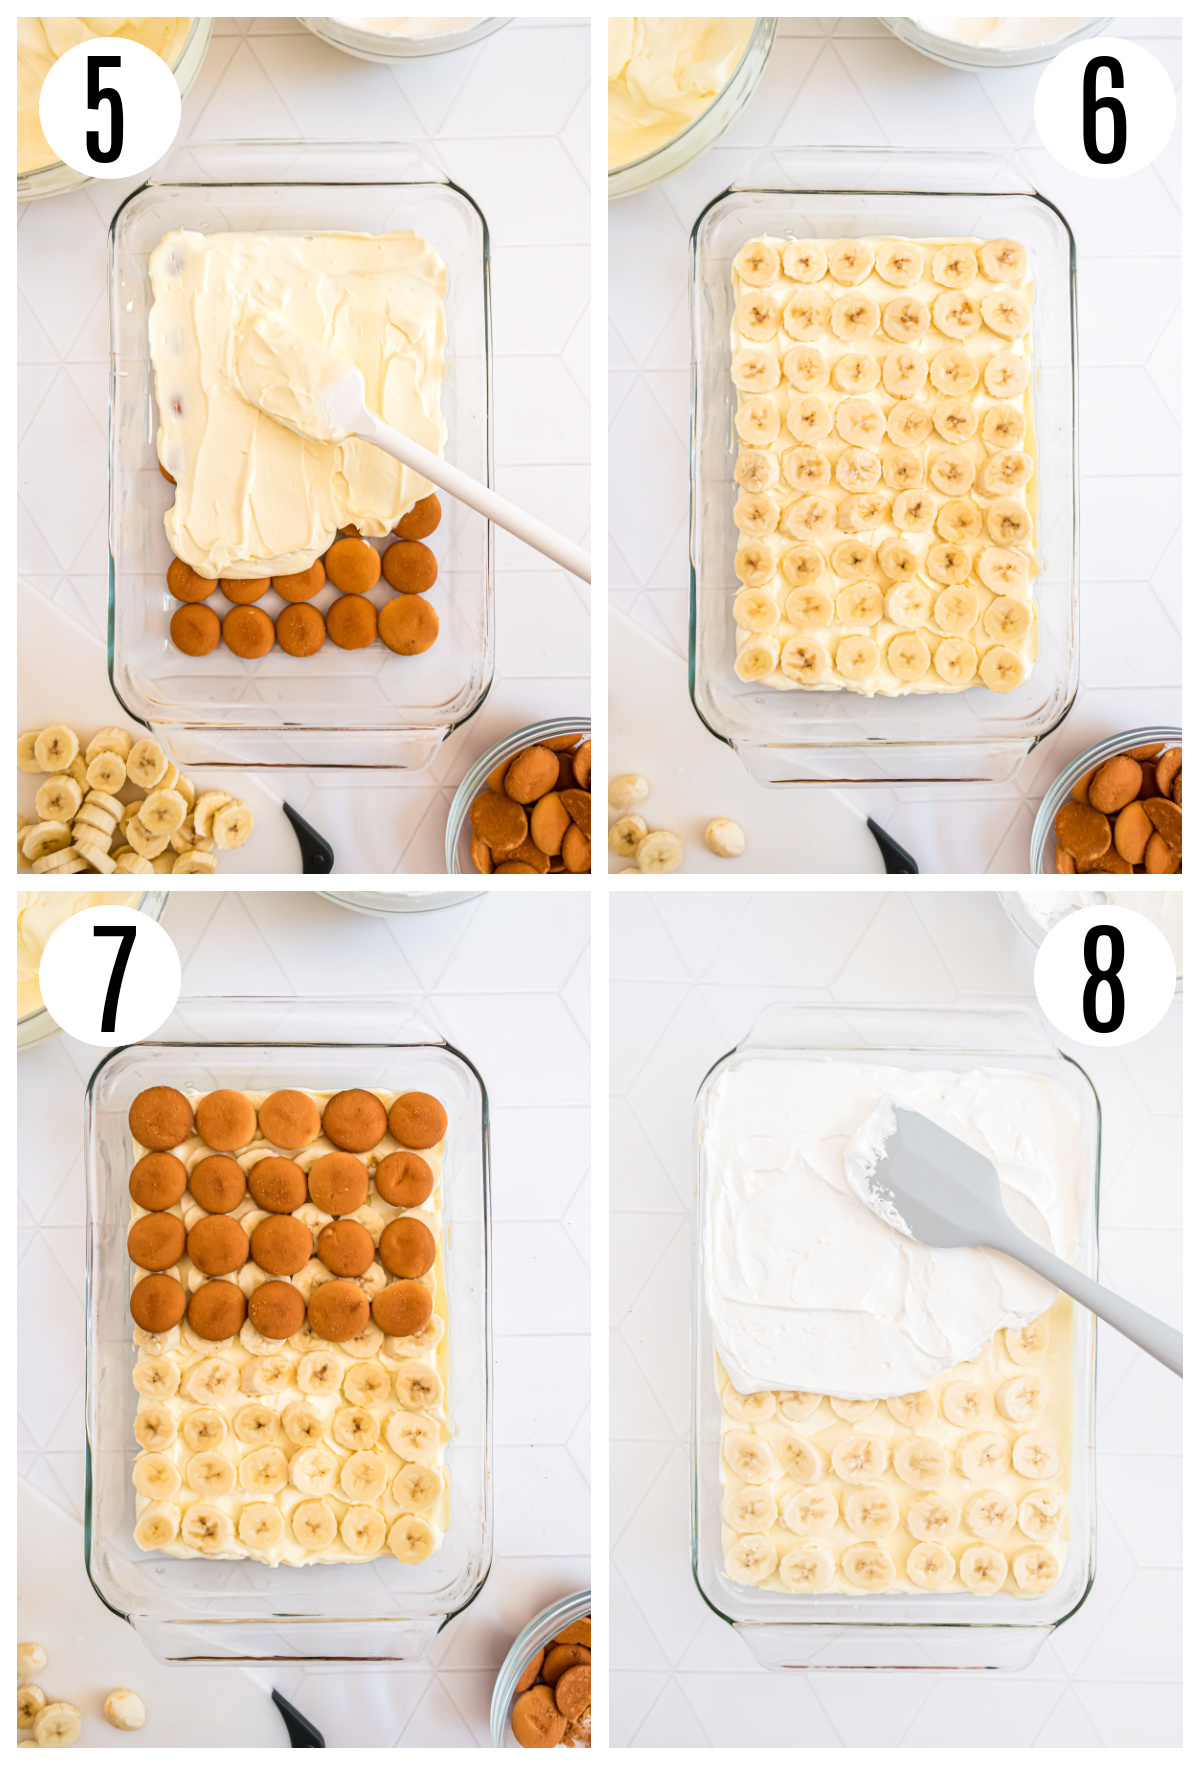 The next steps to making the banana pudding with cream cheese include placing Nilla wafers in a single layer in a 9"x13" dish, adding a layer of pudding on top, adding a layer or sliced bananas on top and then repeating and finally topping with Cool Whip.